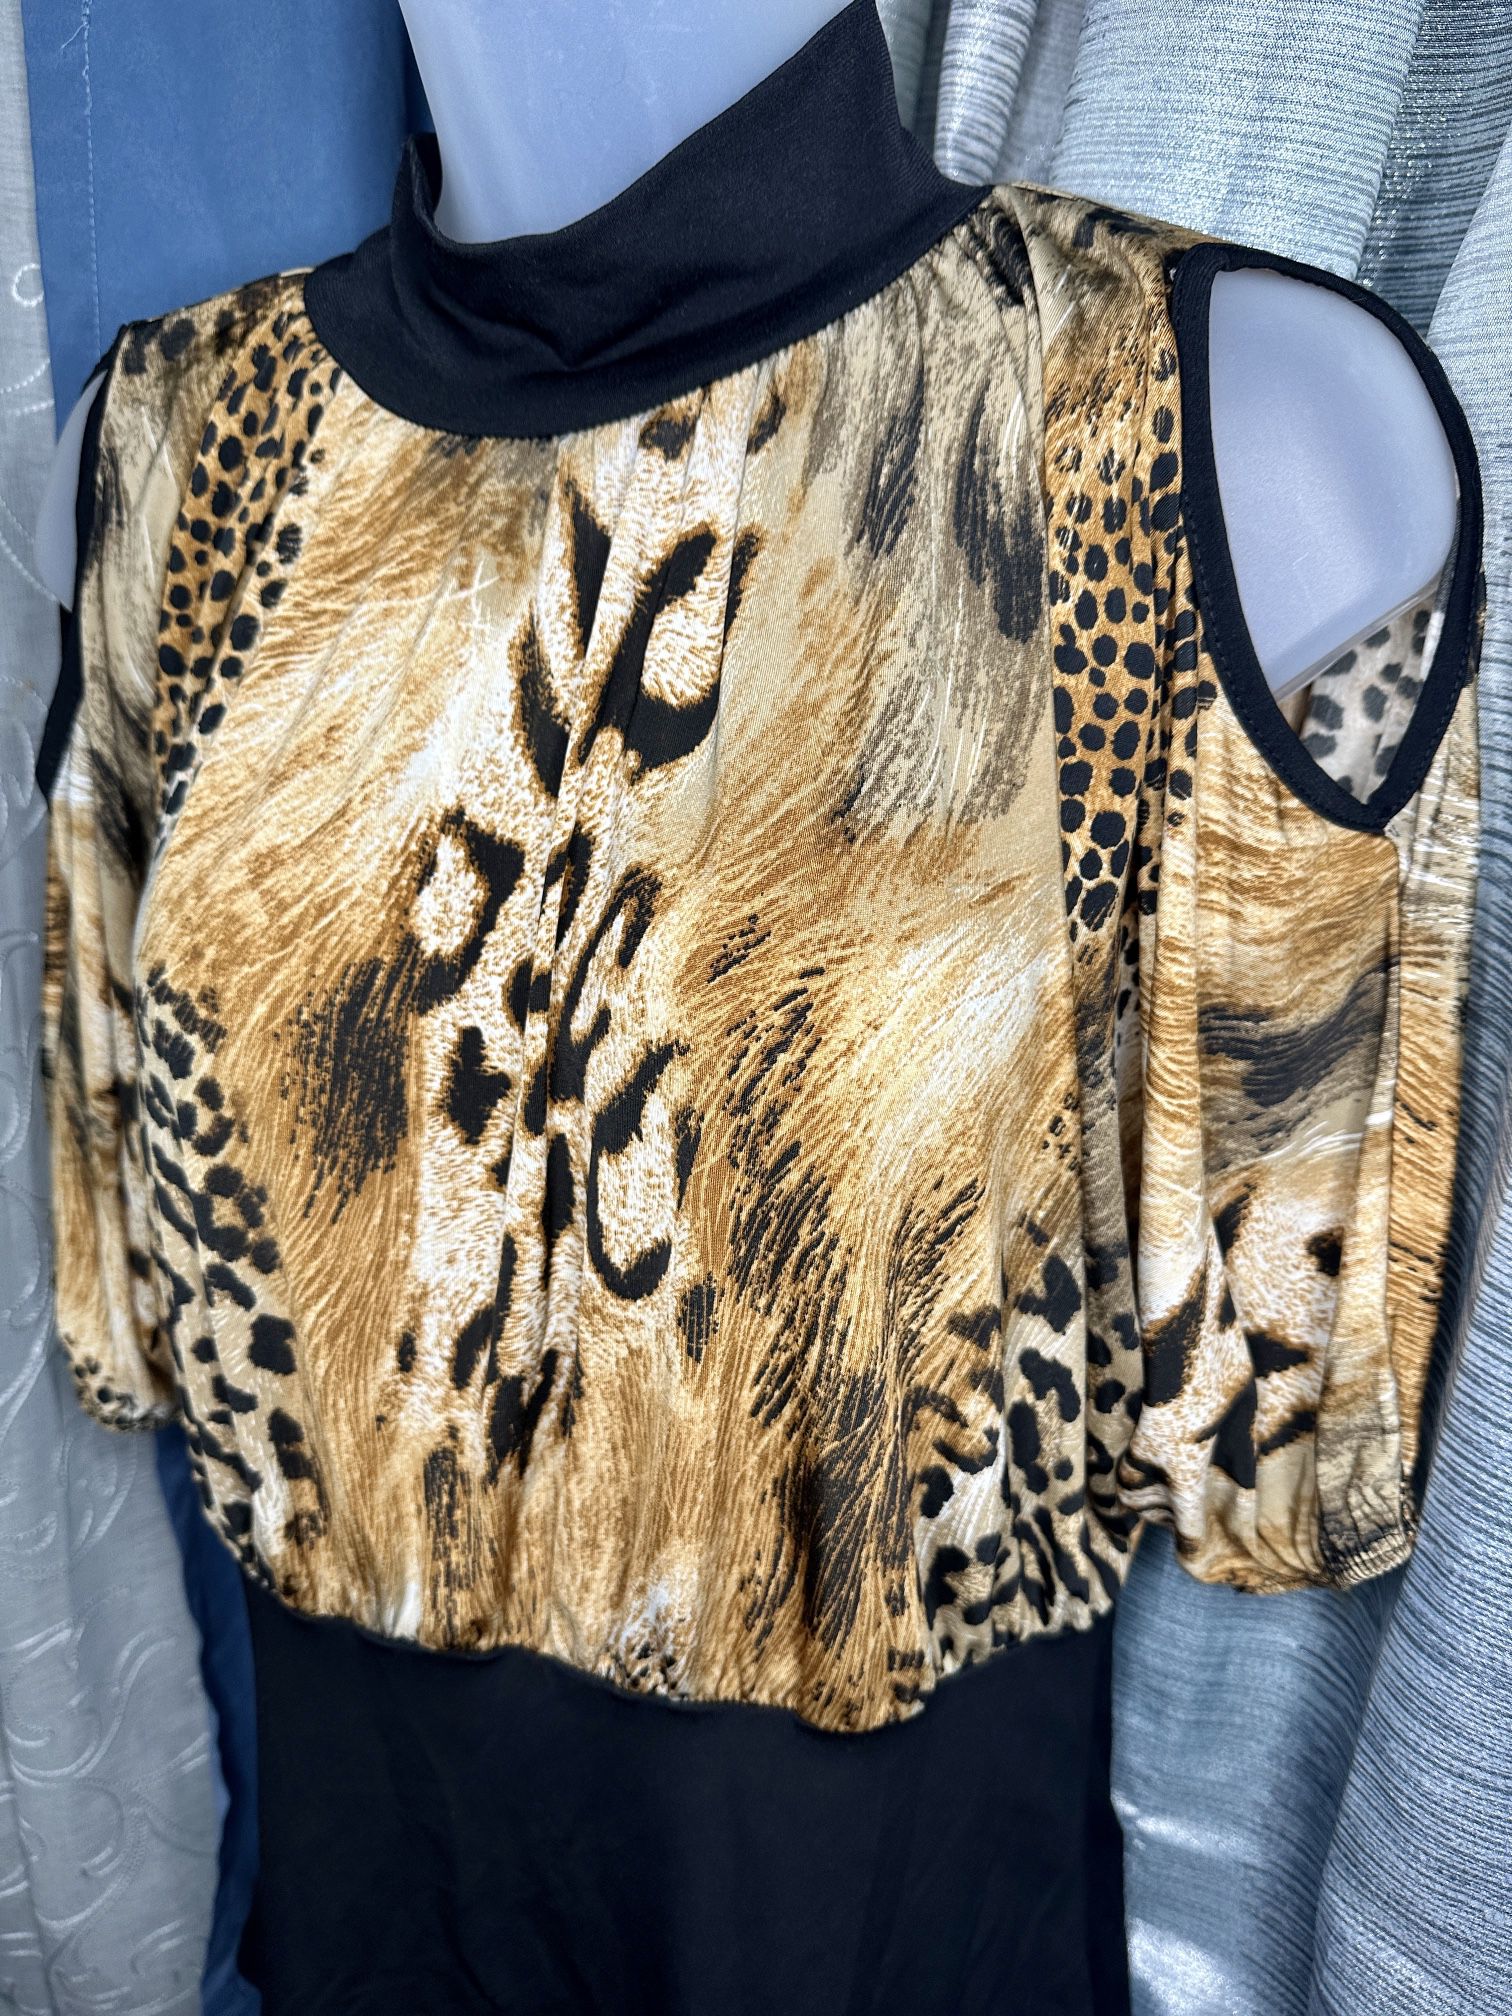 Say Anything ~ Women’s Leopard Blouse 3/4 Sleeve Open Shoulder - Size Large